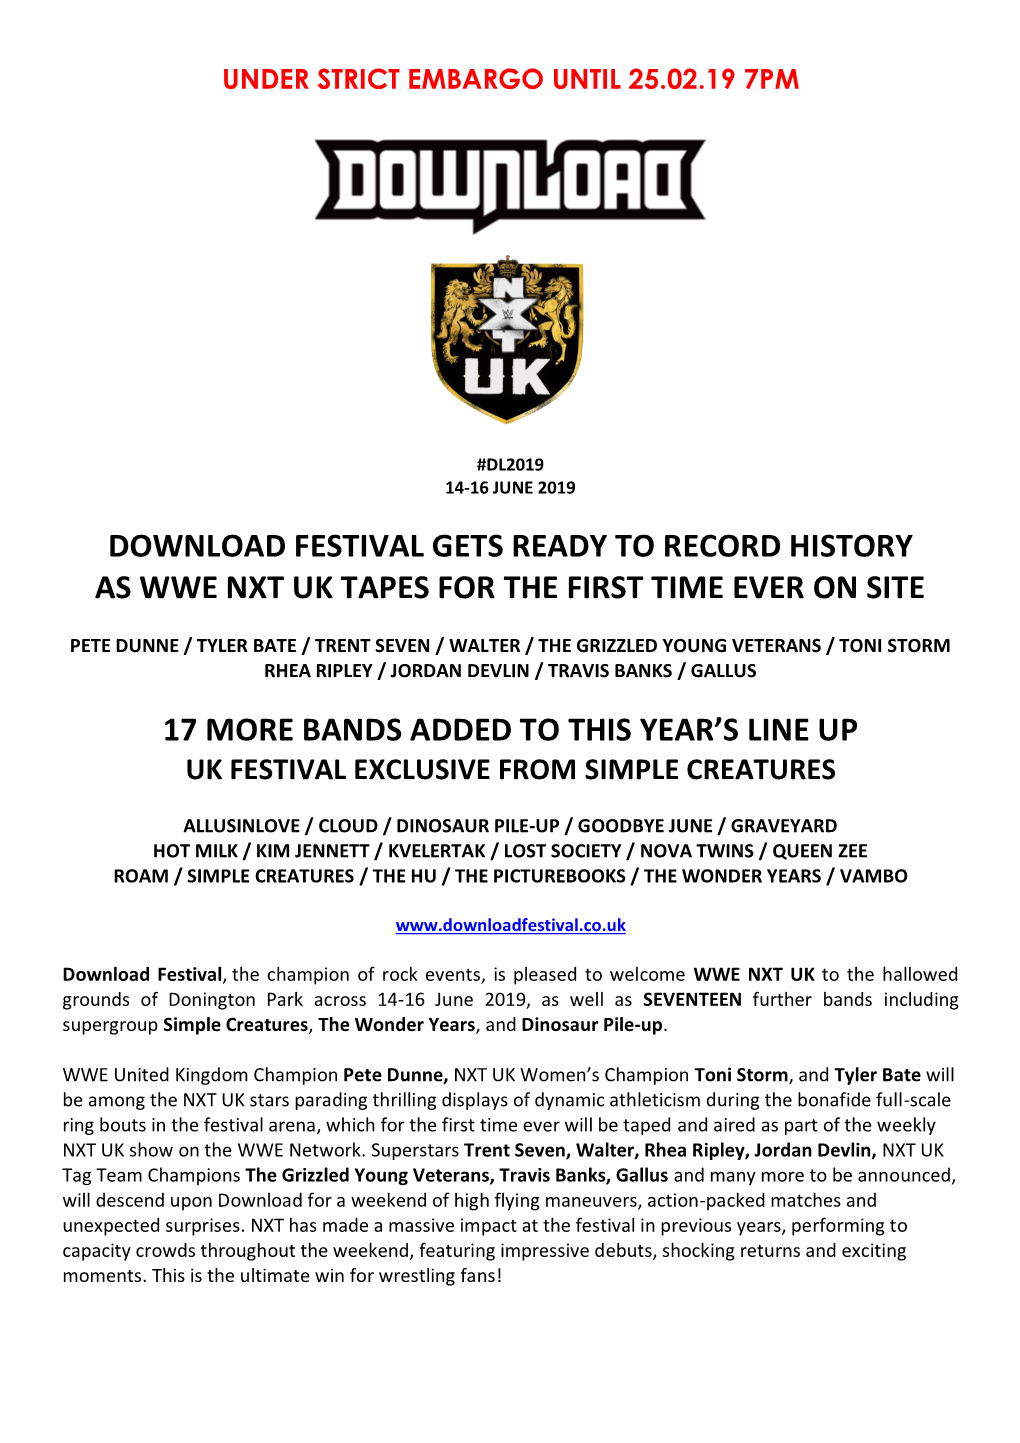 Download Festival Gets Ready to Record History As Wwe Nxt Uk Tapes for the First Time Ever on Site